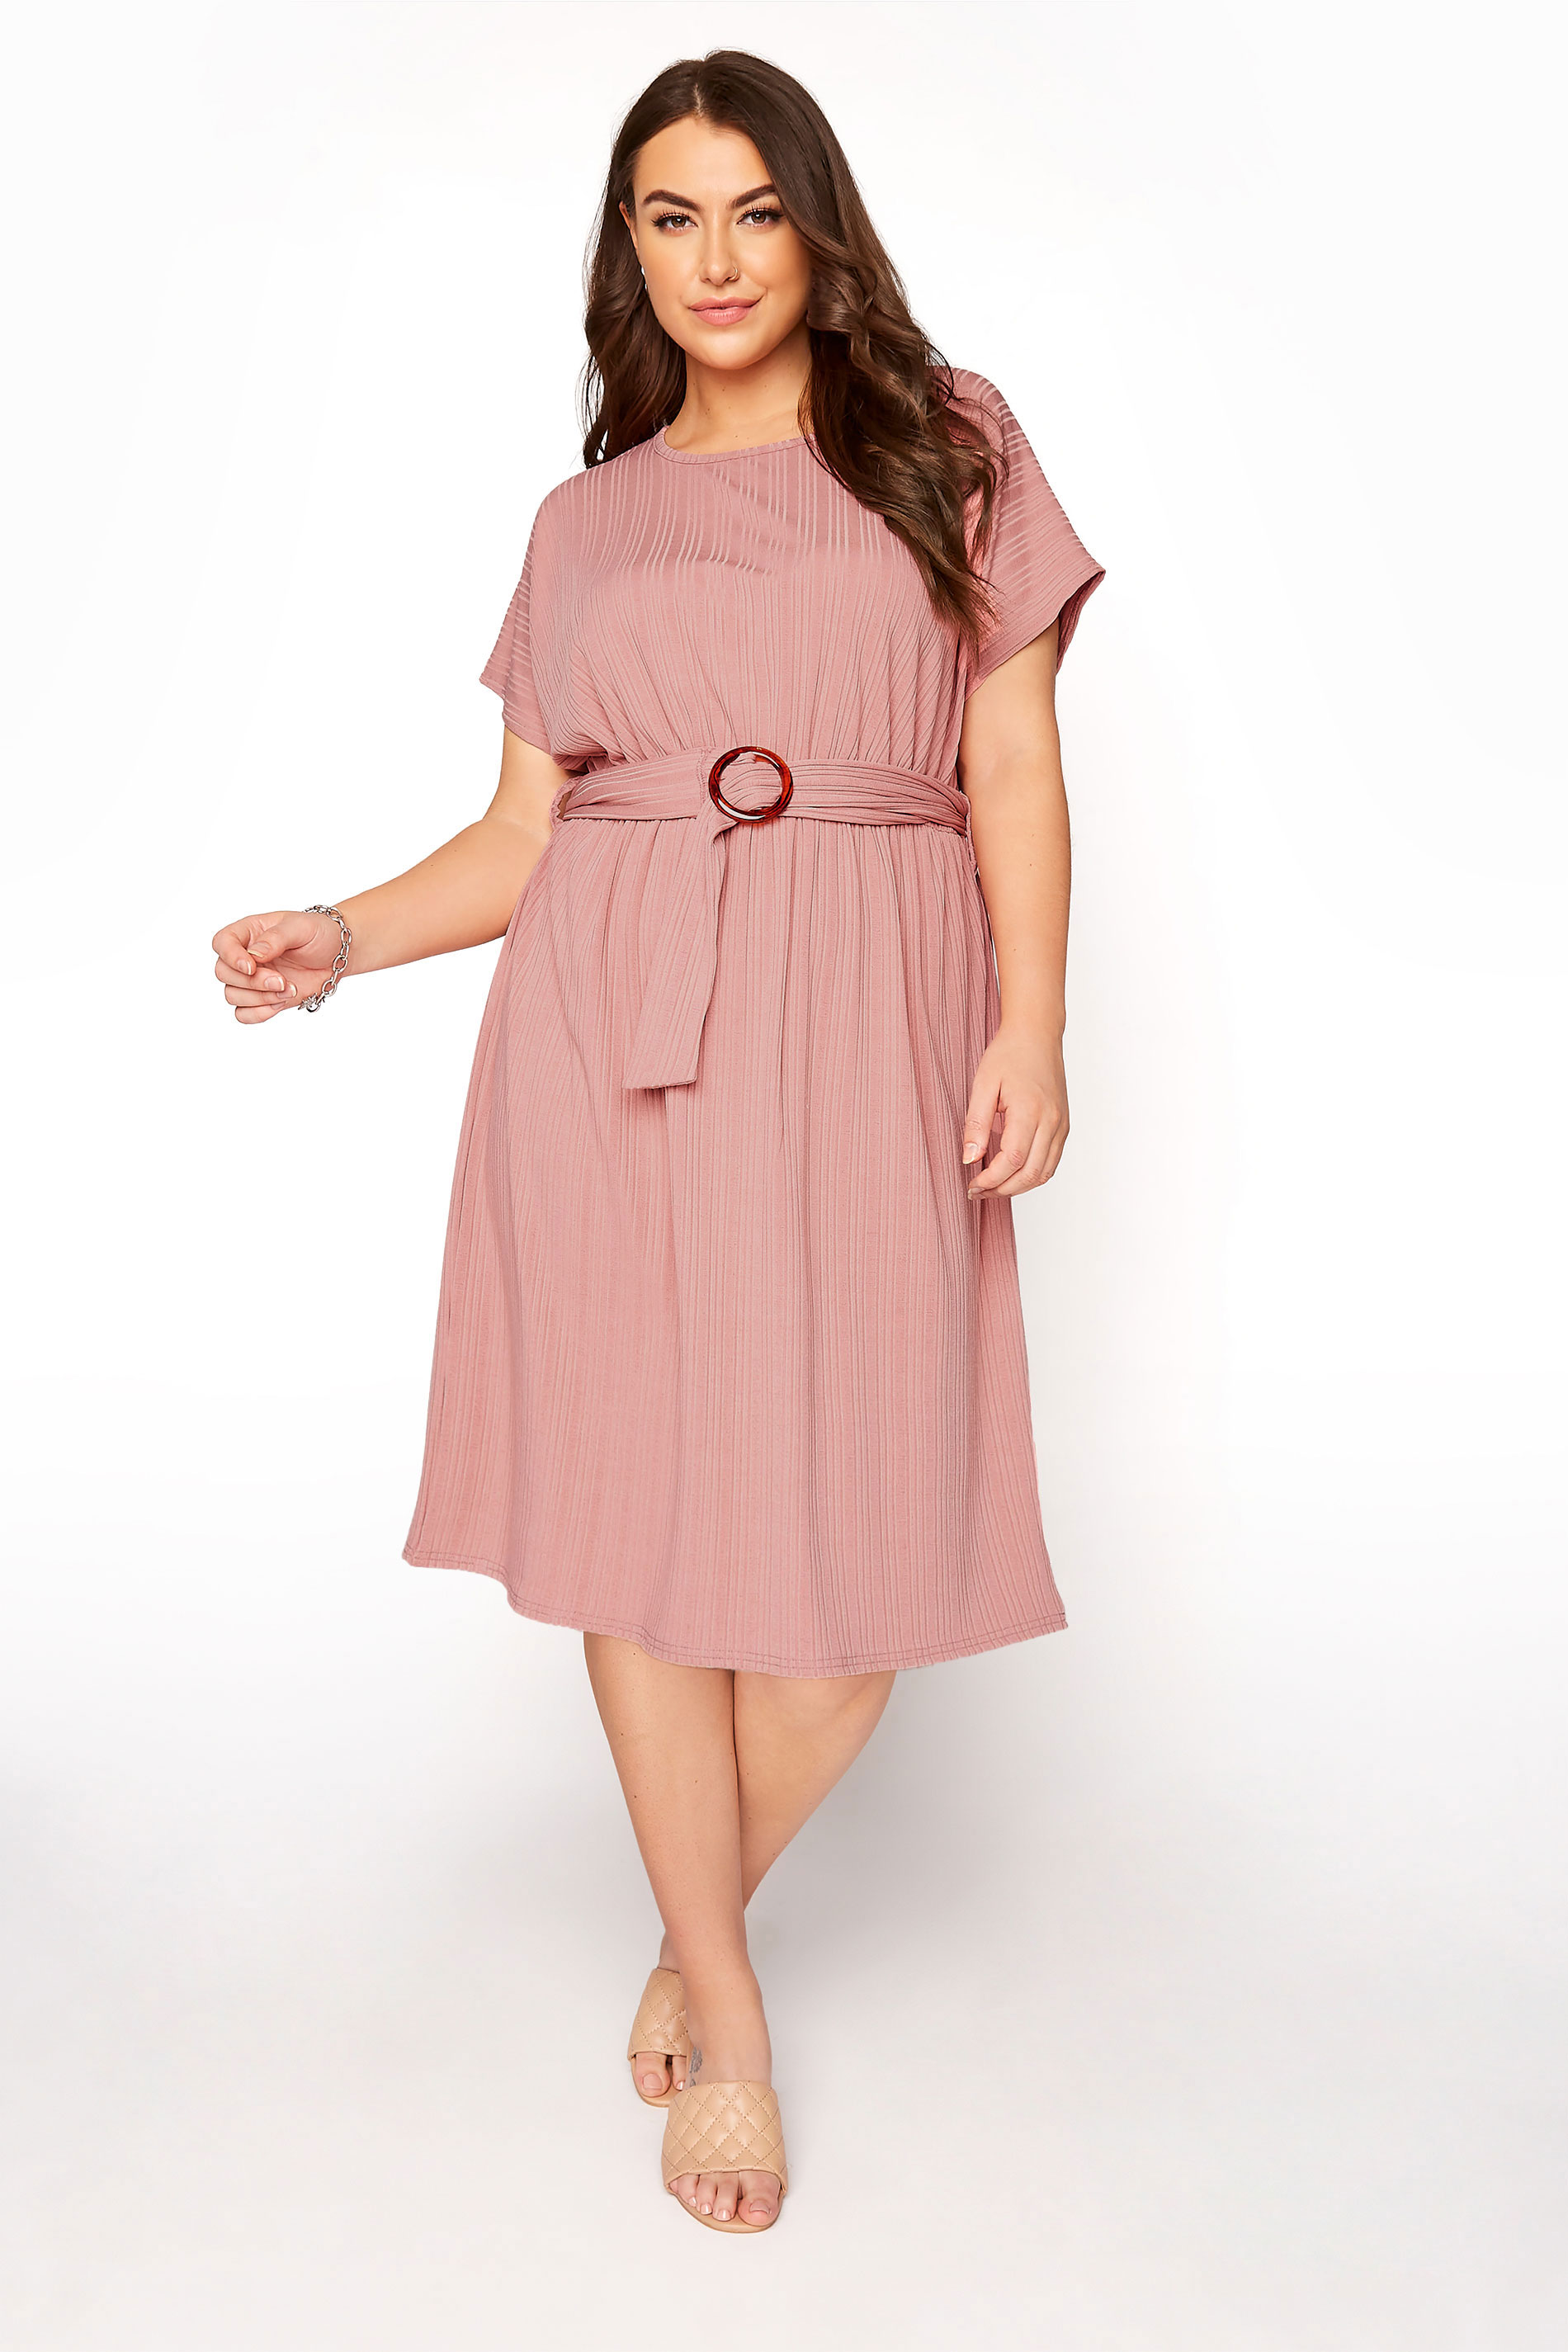 YOURS LONDON Pink Ribbed Belted Dress_A.jpg